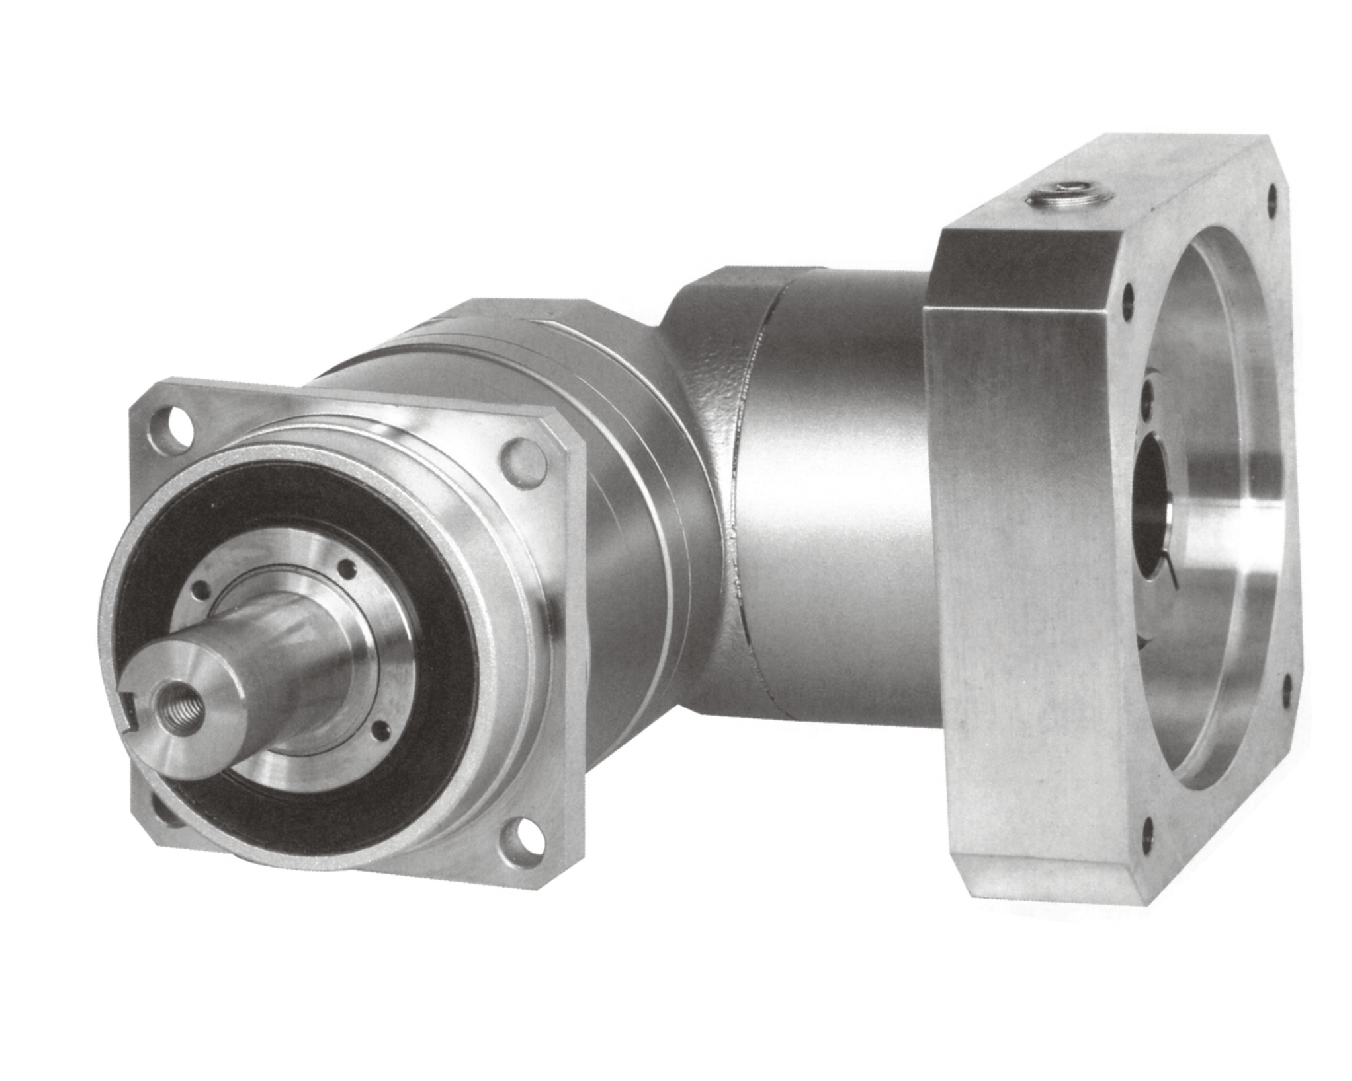 EED EPES precision planetary reducer gearbox